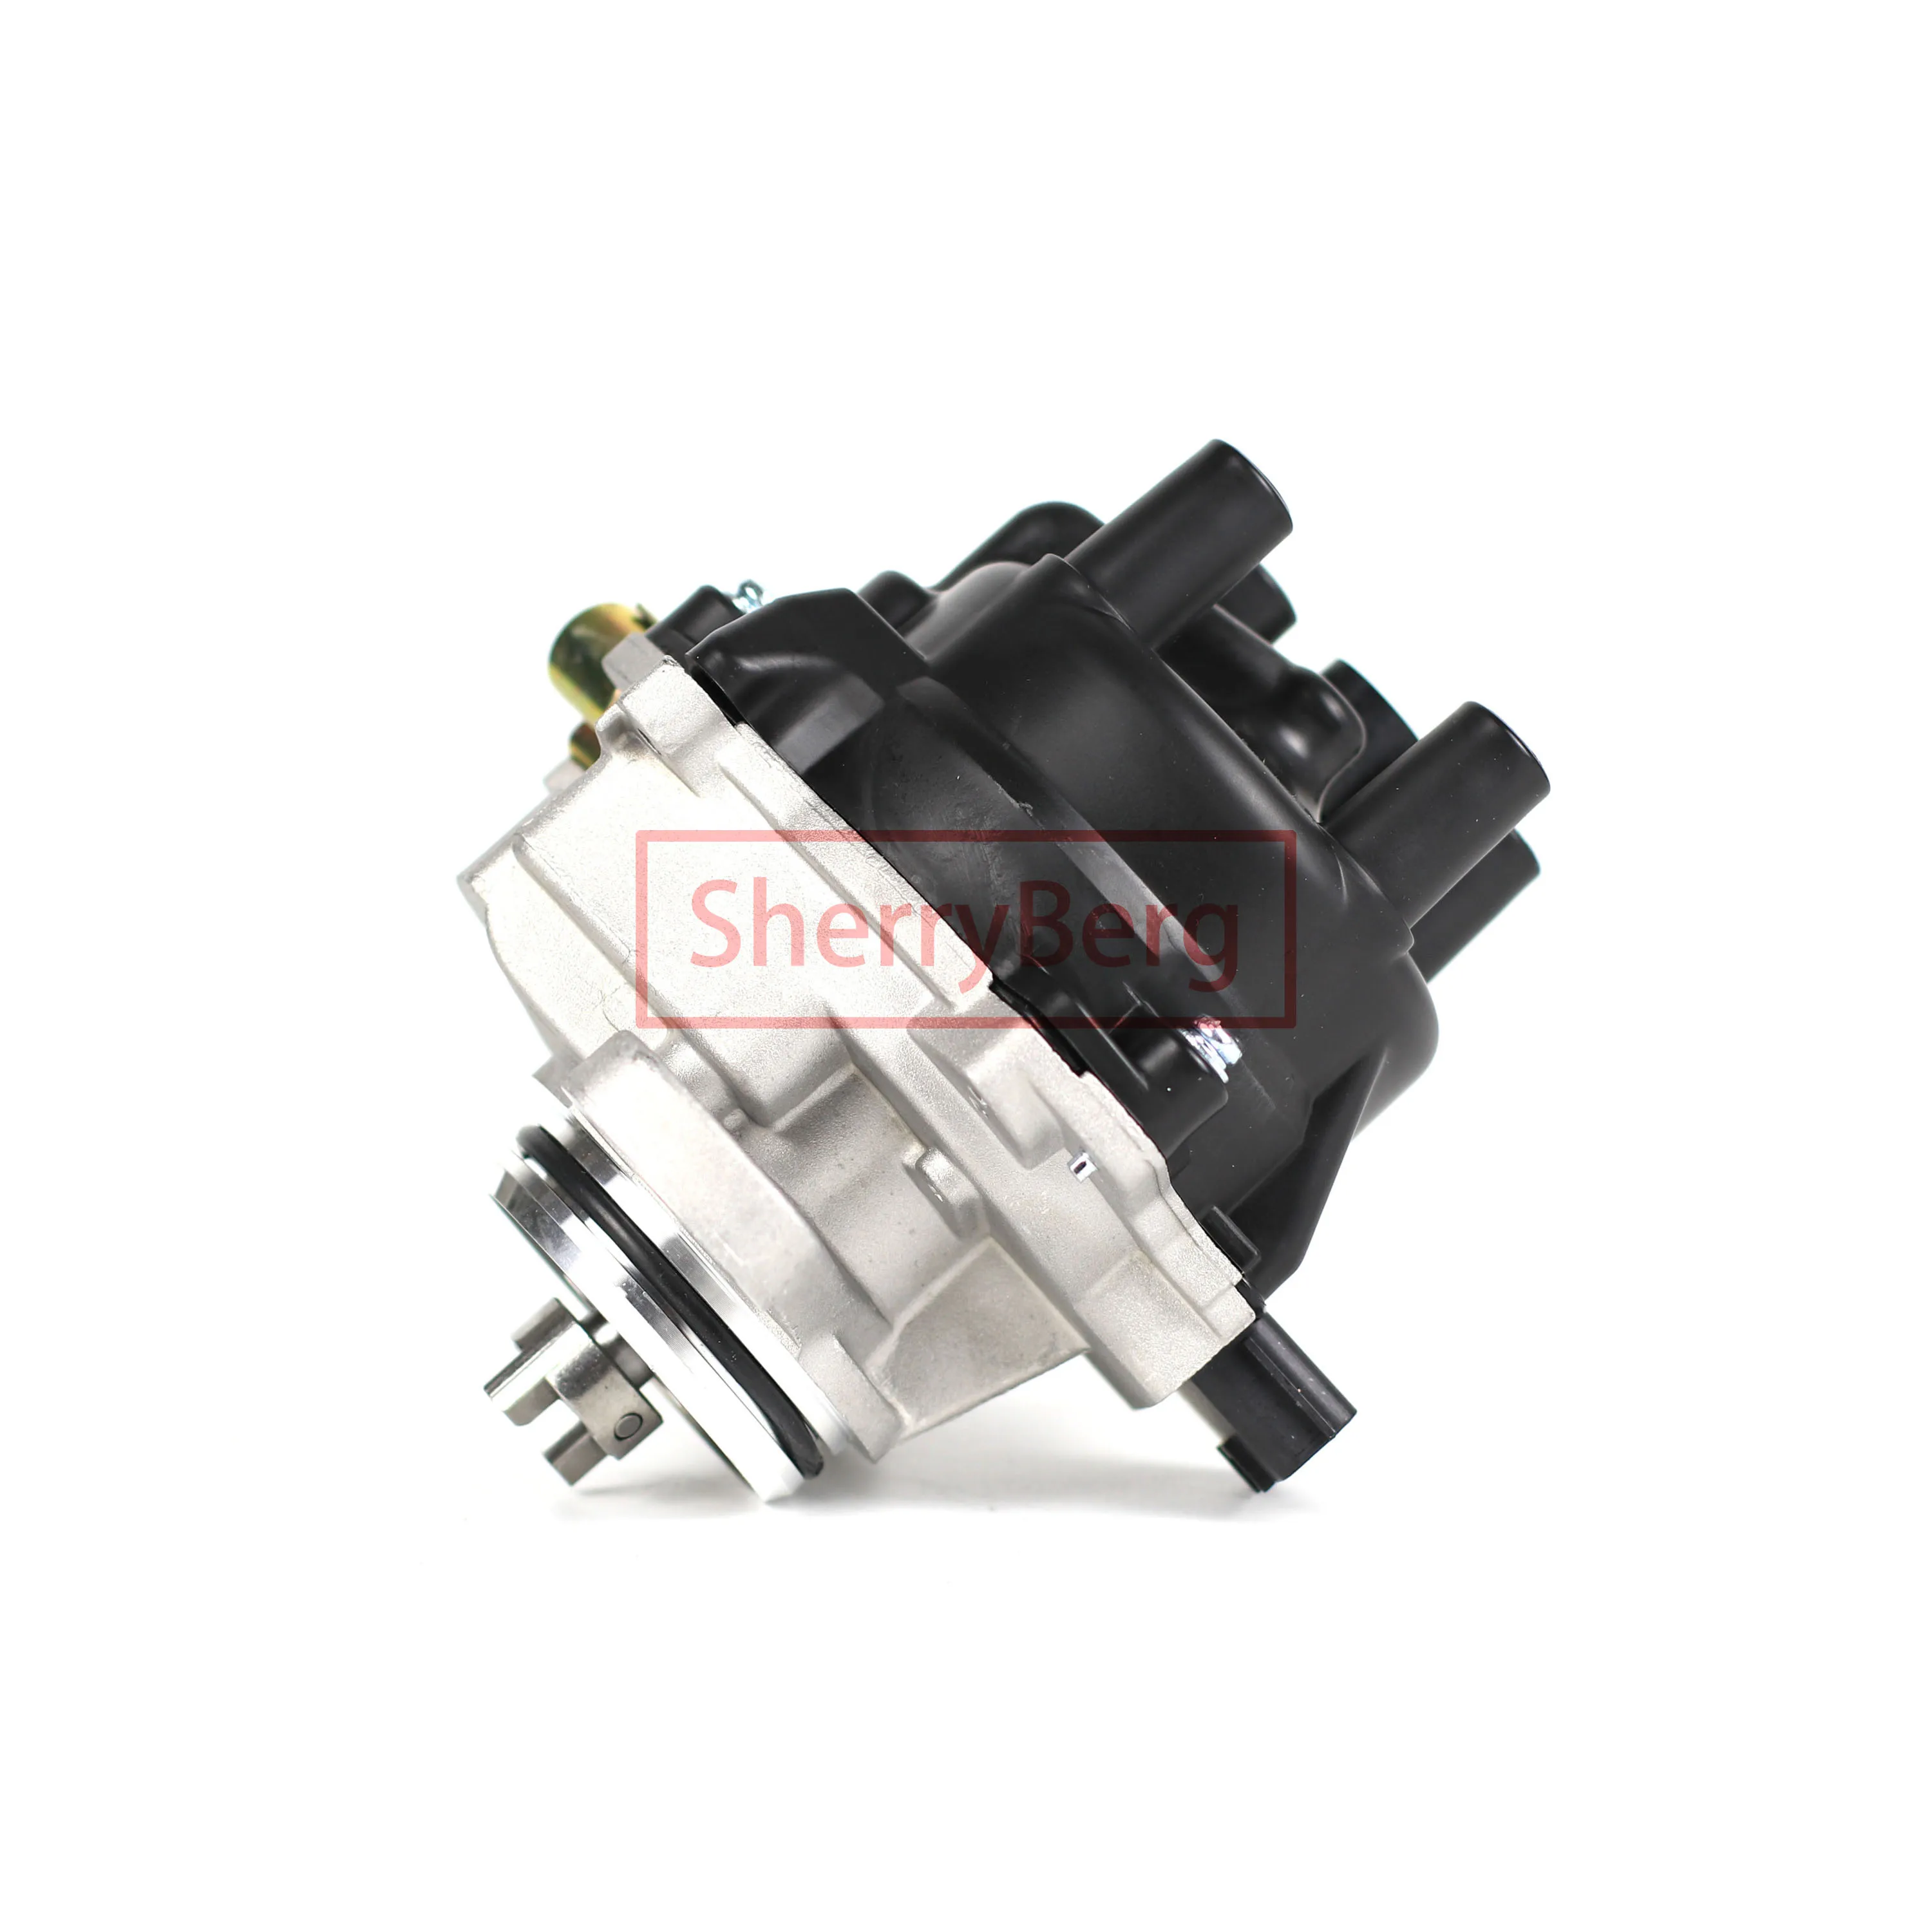 SherryBerg Ignition Complete Distributor for Nissan Ni-ssan Sentra 1.6L OEM 22100-F4300 22100F4300 F4302 F4362